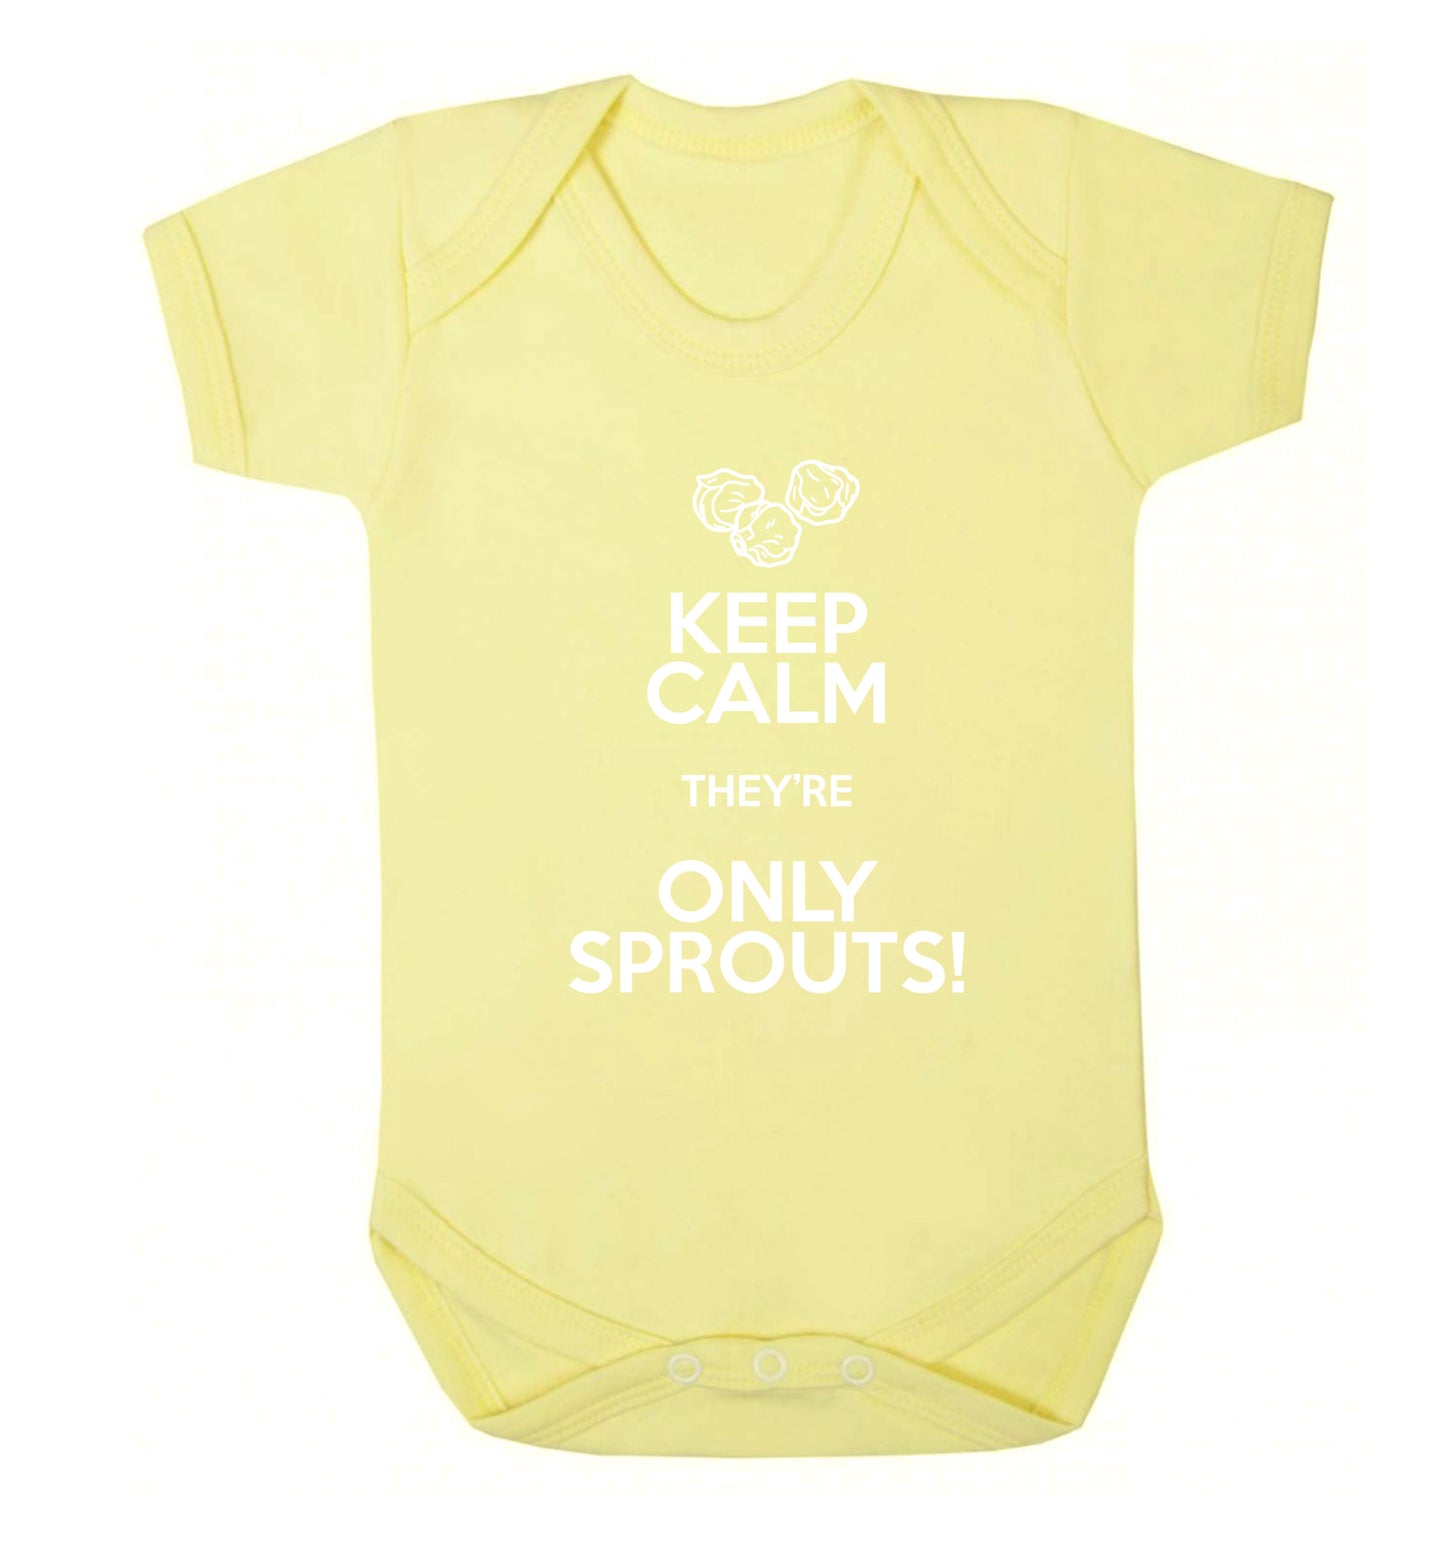 Keep calm they're only sprouts Baby Vest pale yellow 18-24 months